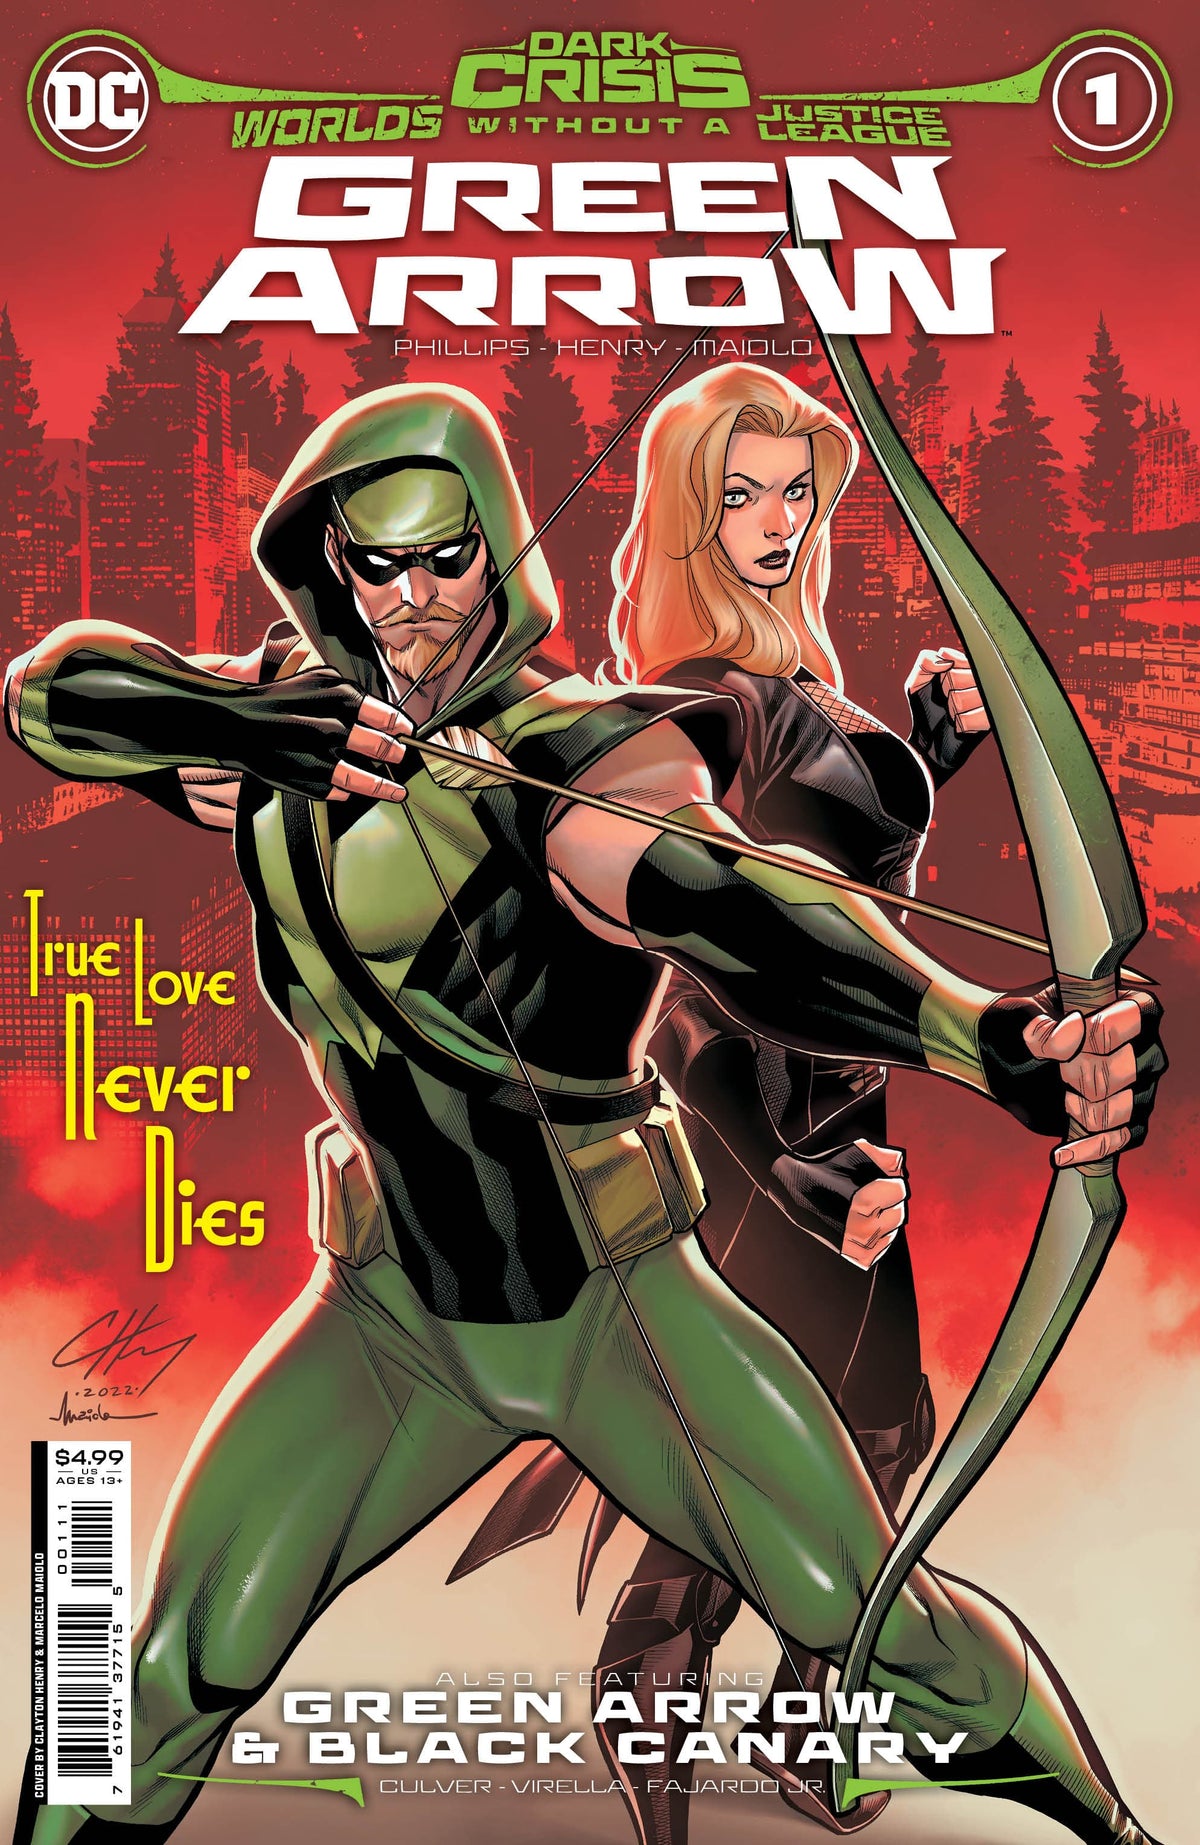 DARK CRISIS WORLDS WITHOUT A JUSTICE LEAGUE GREEN ARROW #1 (ONE SHOT) CVR A CLAYTON HENRY - Third Eye